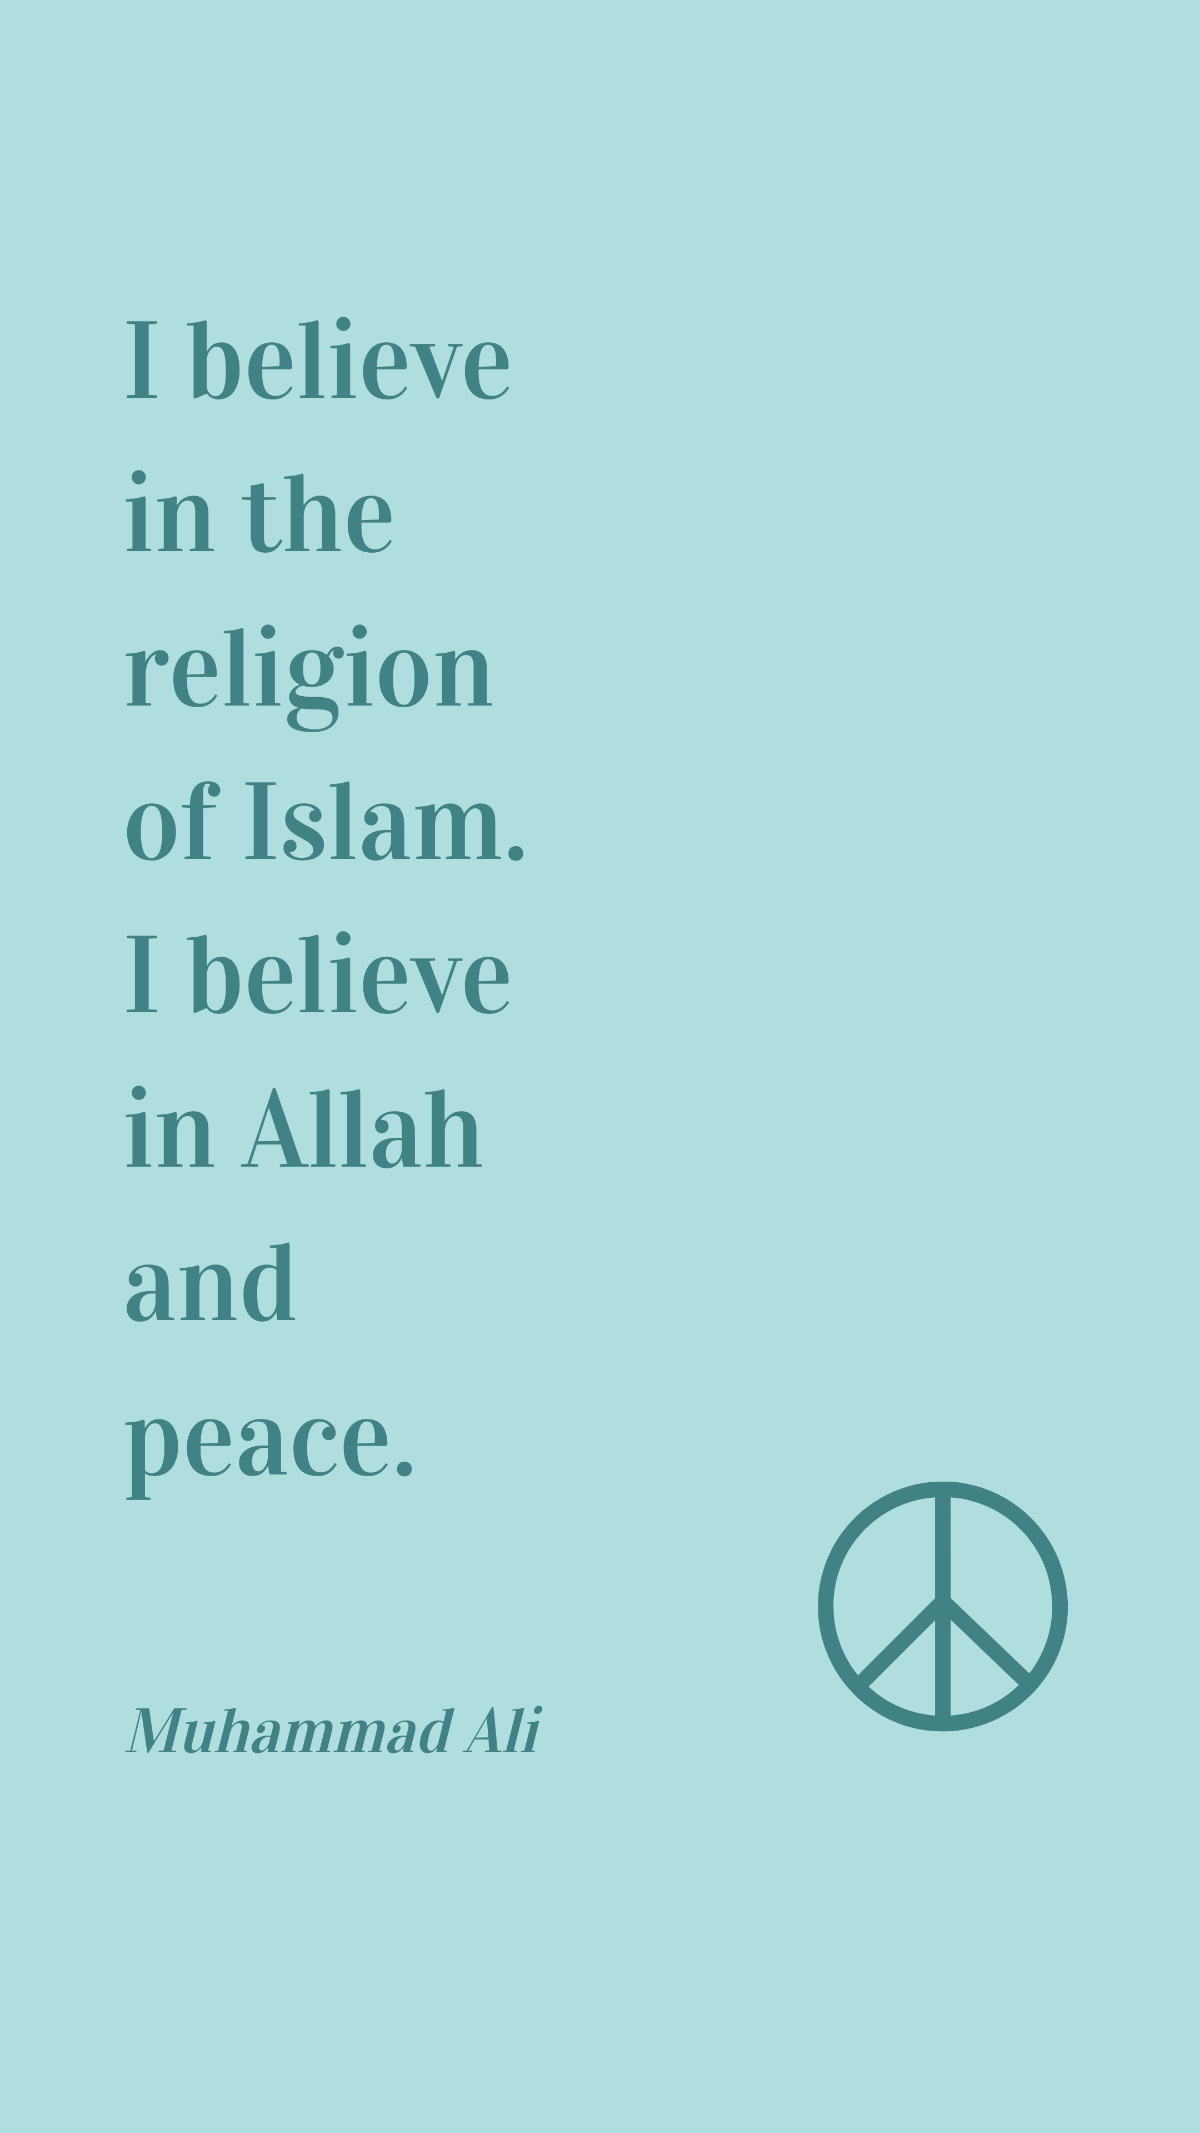 Muhammad Ali - I believe in the religion of Islam. I believe in Allah and peace. Template